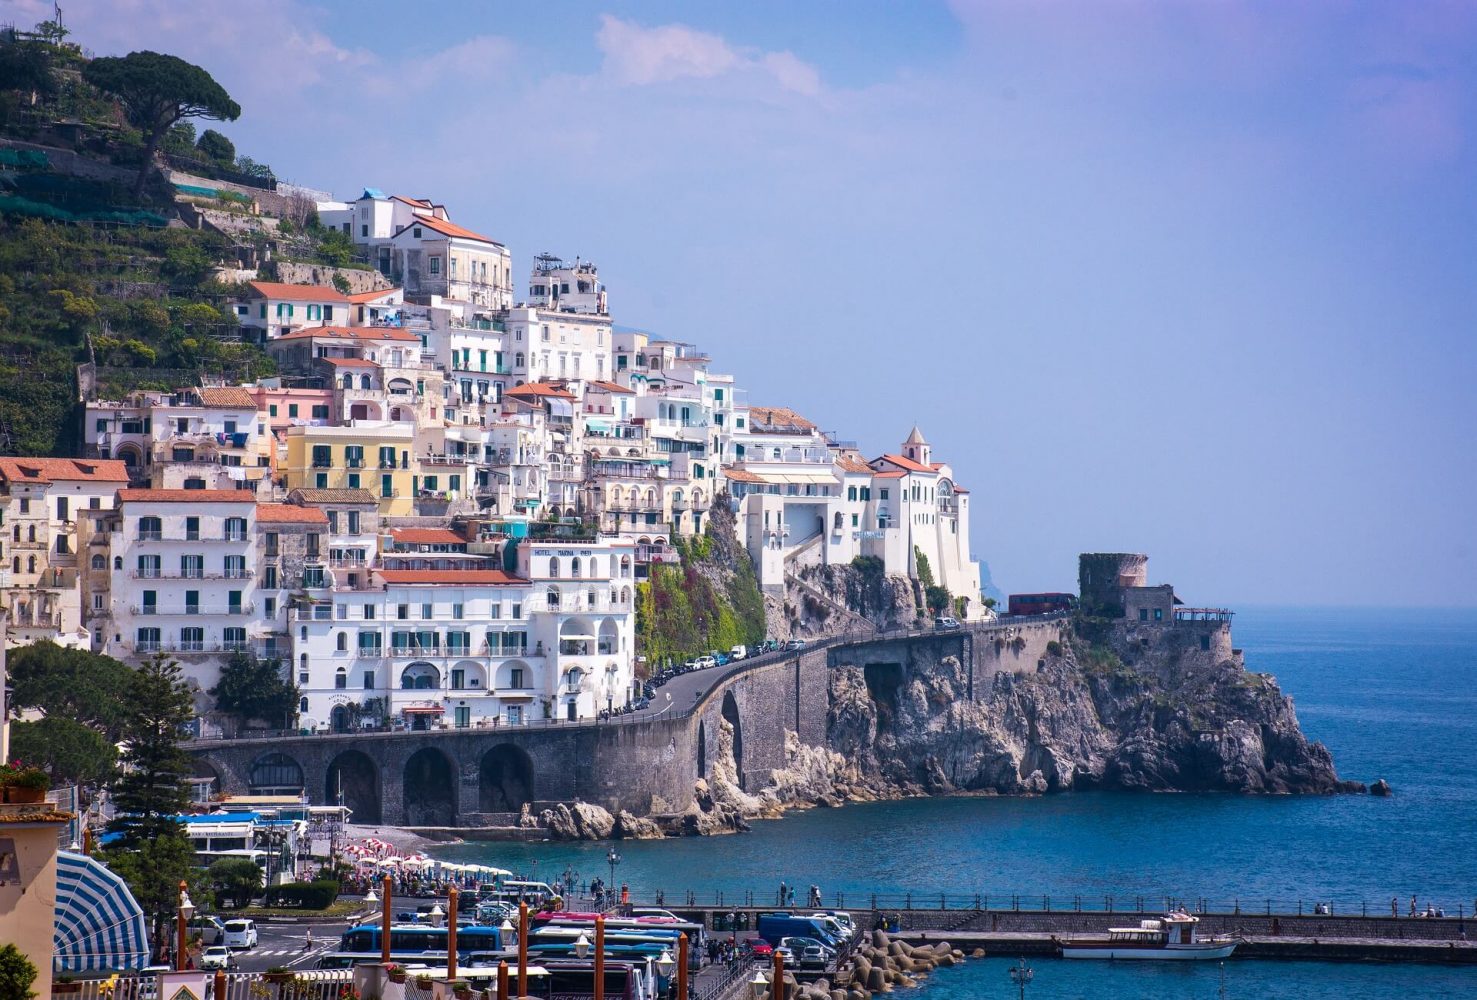 Amalfi- TOP 45 DESTINATIONS TO VISIT IN 2019 FOR INDIANS